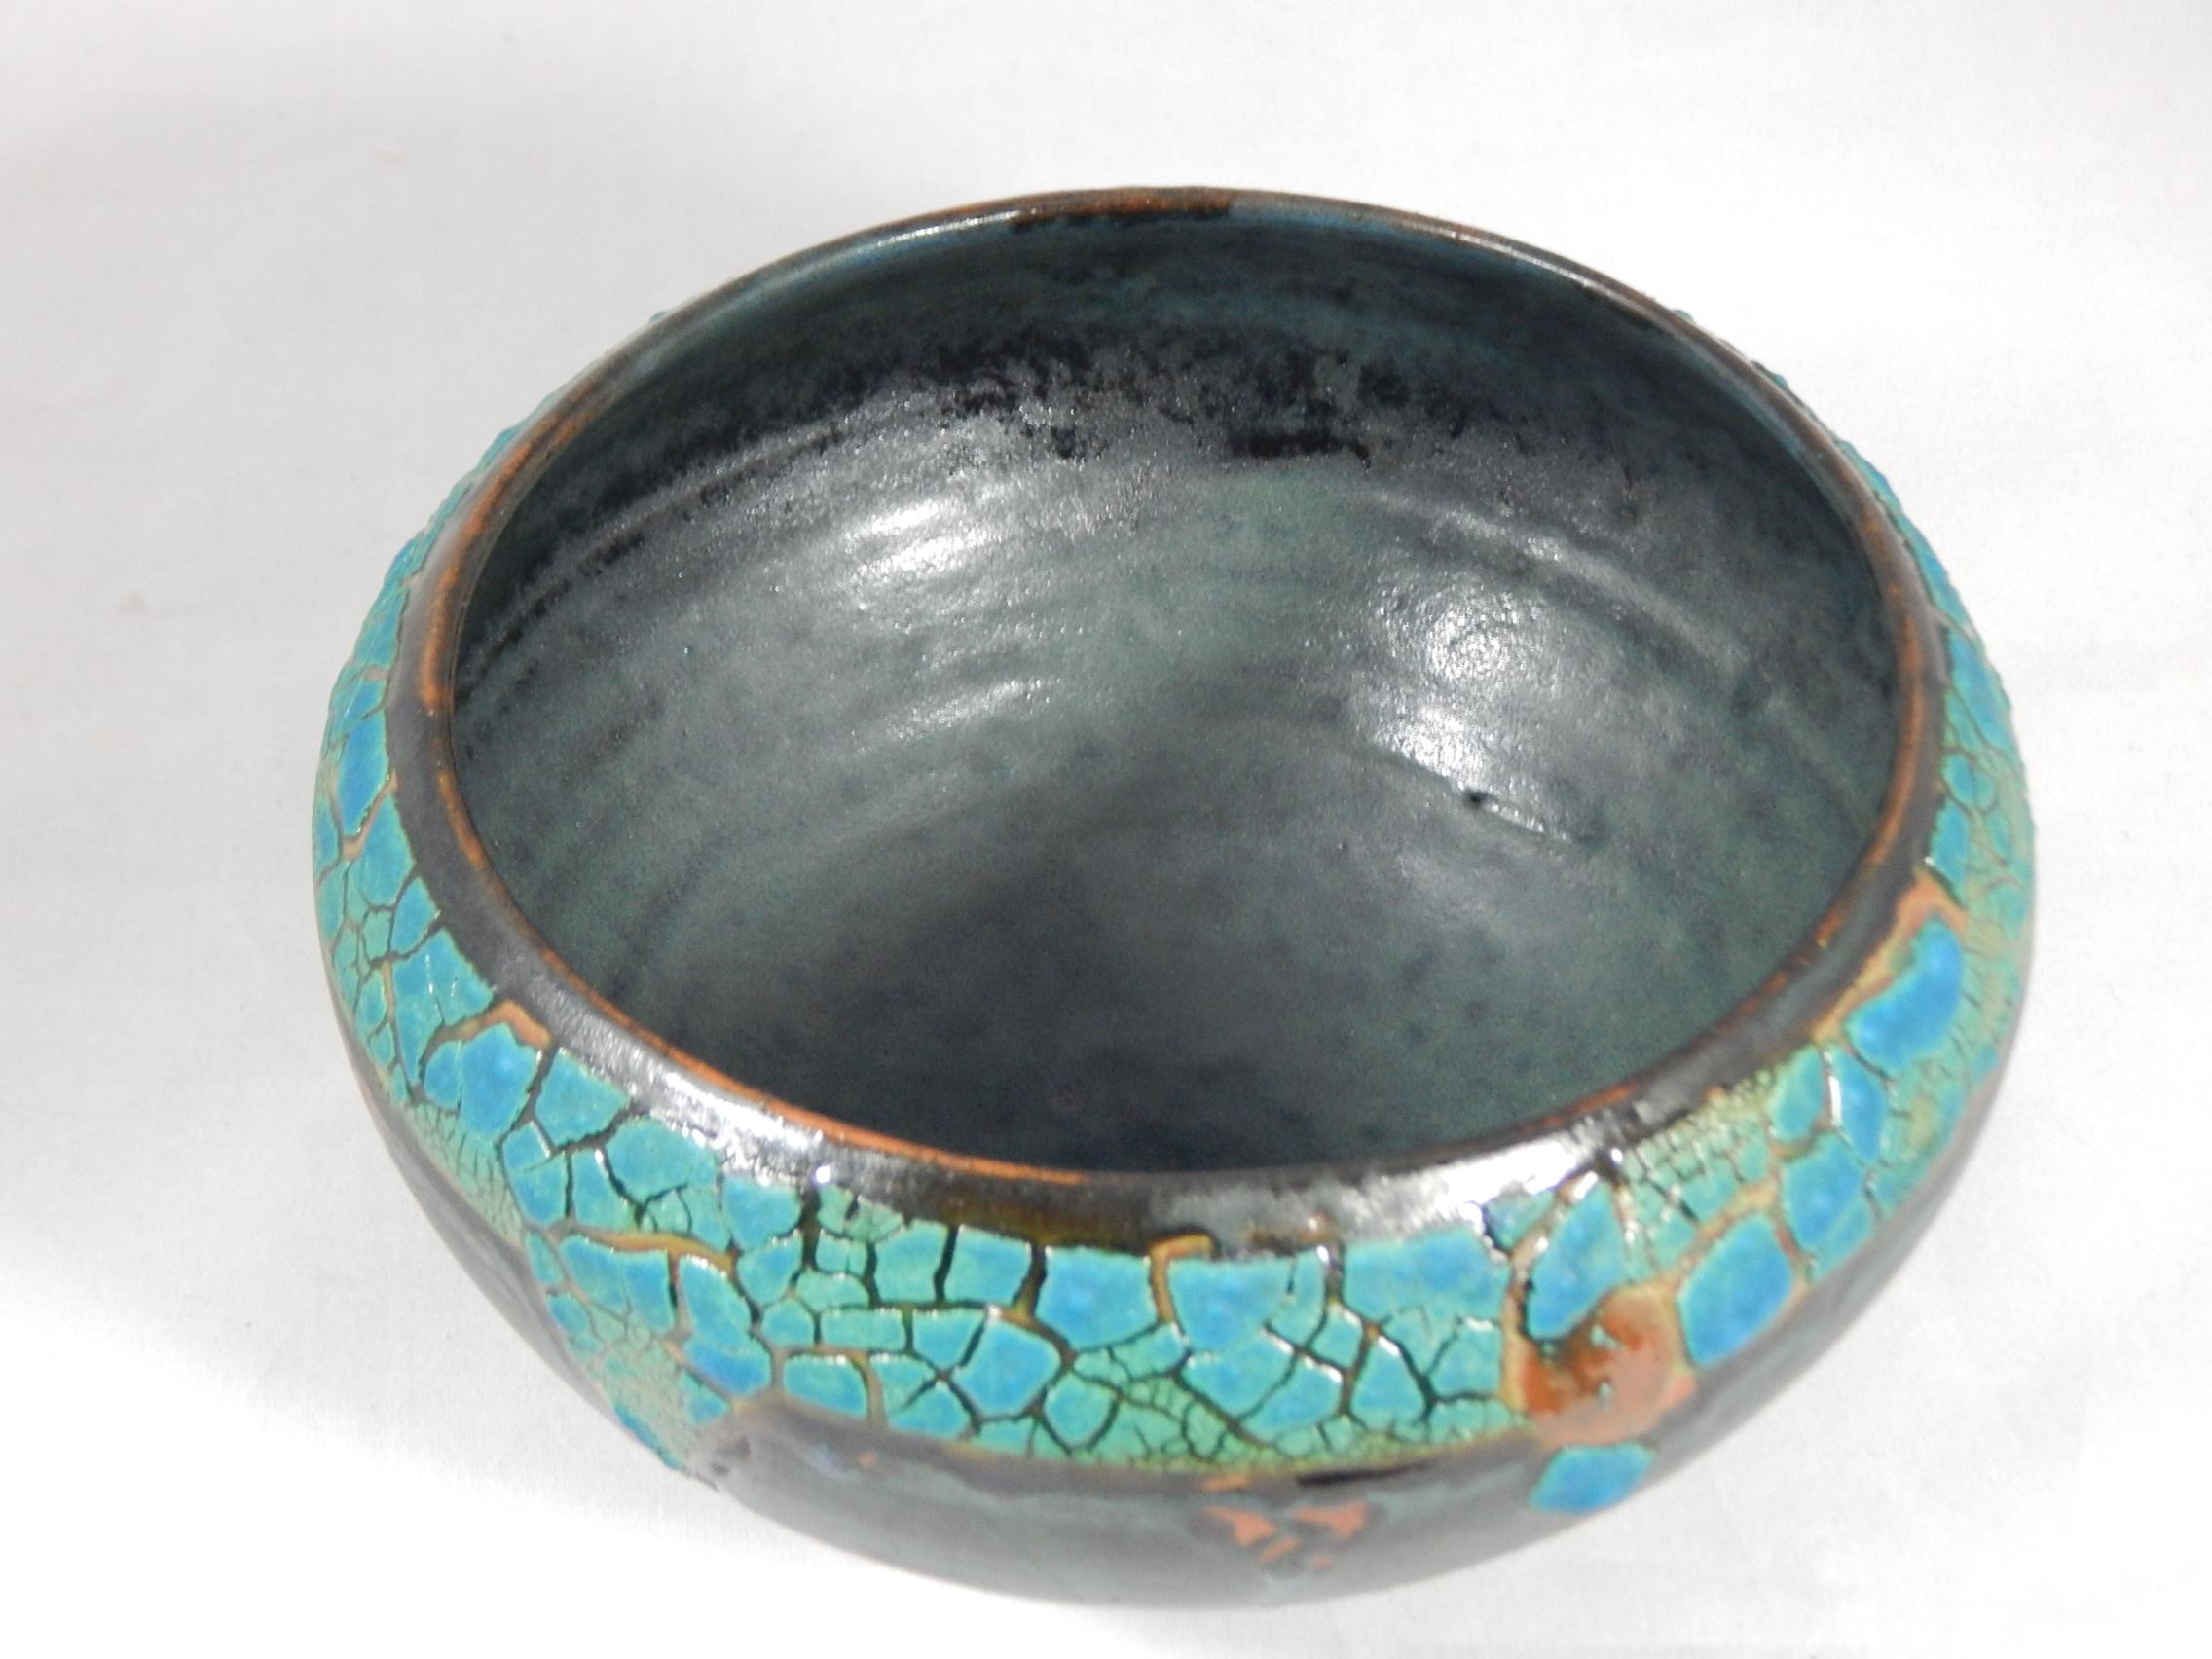 Belsize wheel thrown earthenware vessel by ceramicist Andrew Wilder.
This is a one of a kind object made in the ancient way- by hand in a small artisanal pottery. In this series Wilder explores the application of lichen under glazes to achieve